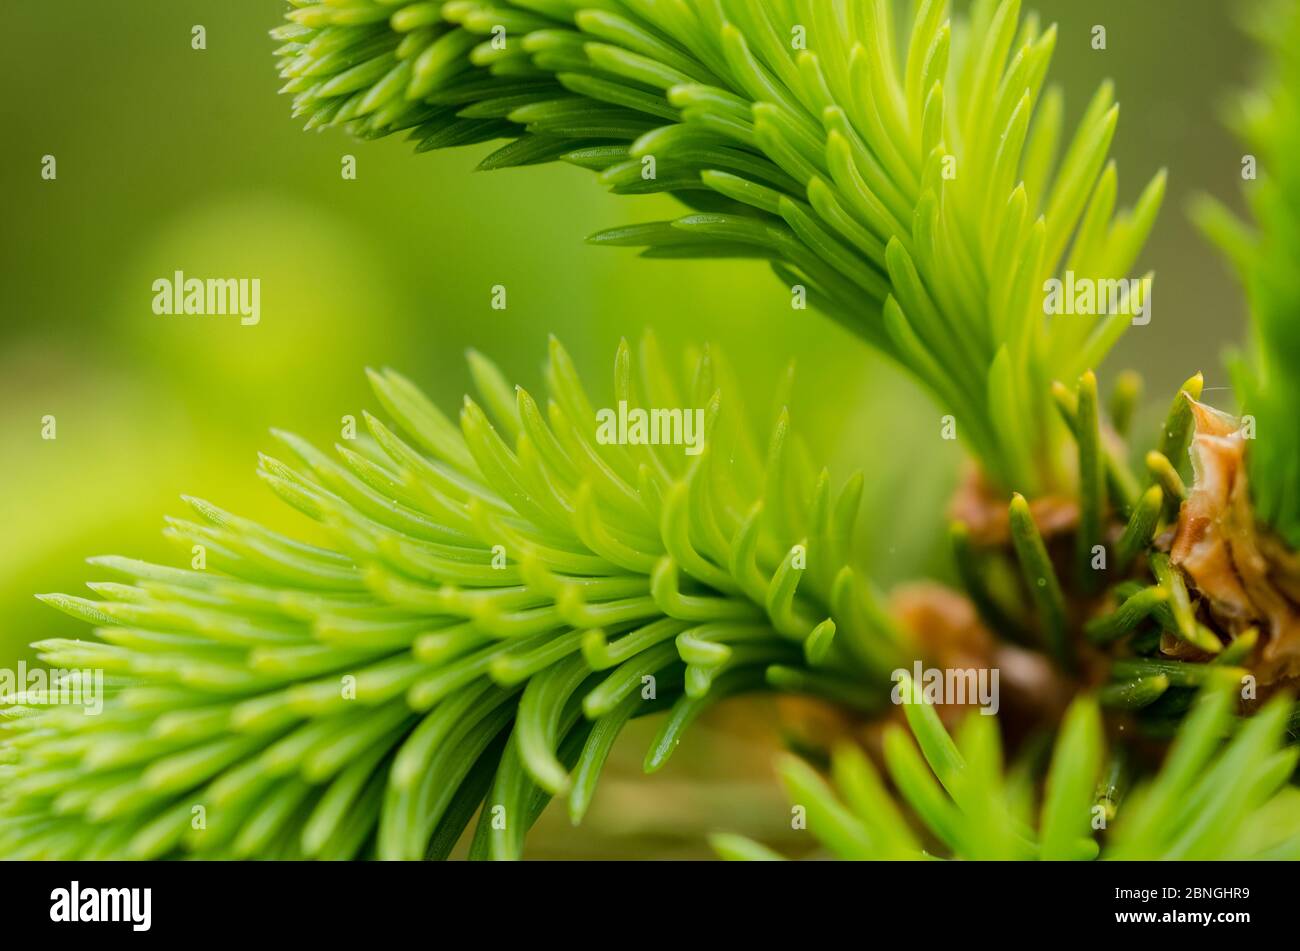 Picea, Piceoideae, Pinaceae, young growing fresh green spruce tree twigs and needles in a forest in Germany Stock Photo